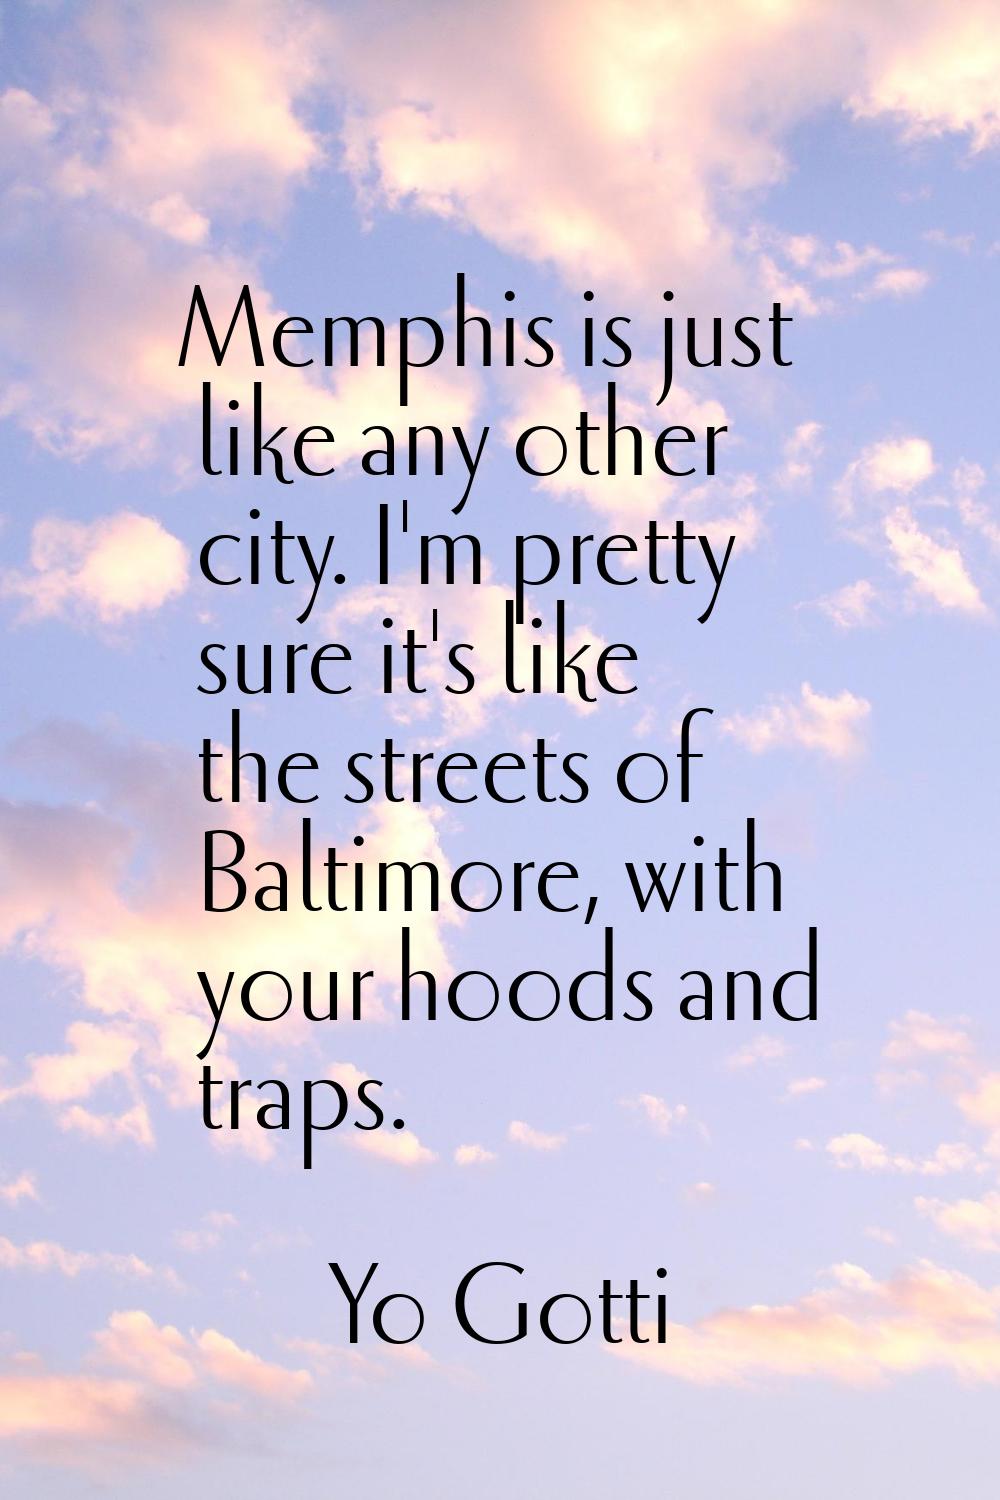 Memphis is just like any other city. I'm pretty sure it's like the streets of Baltimore, with your 